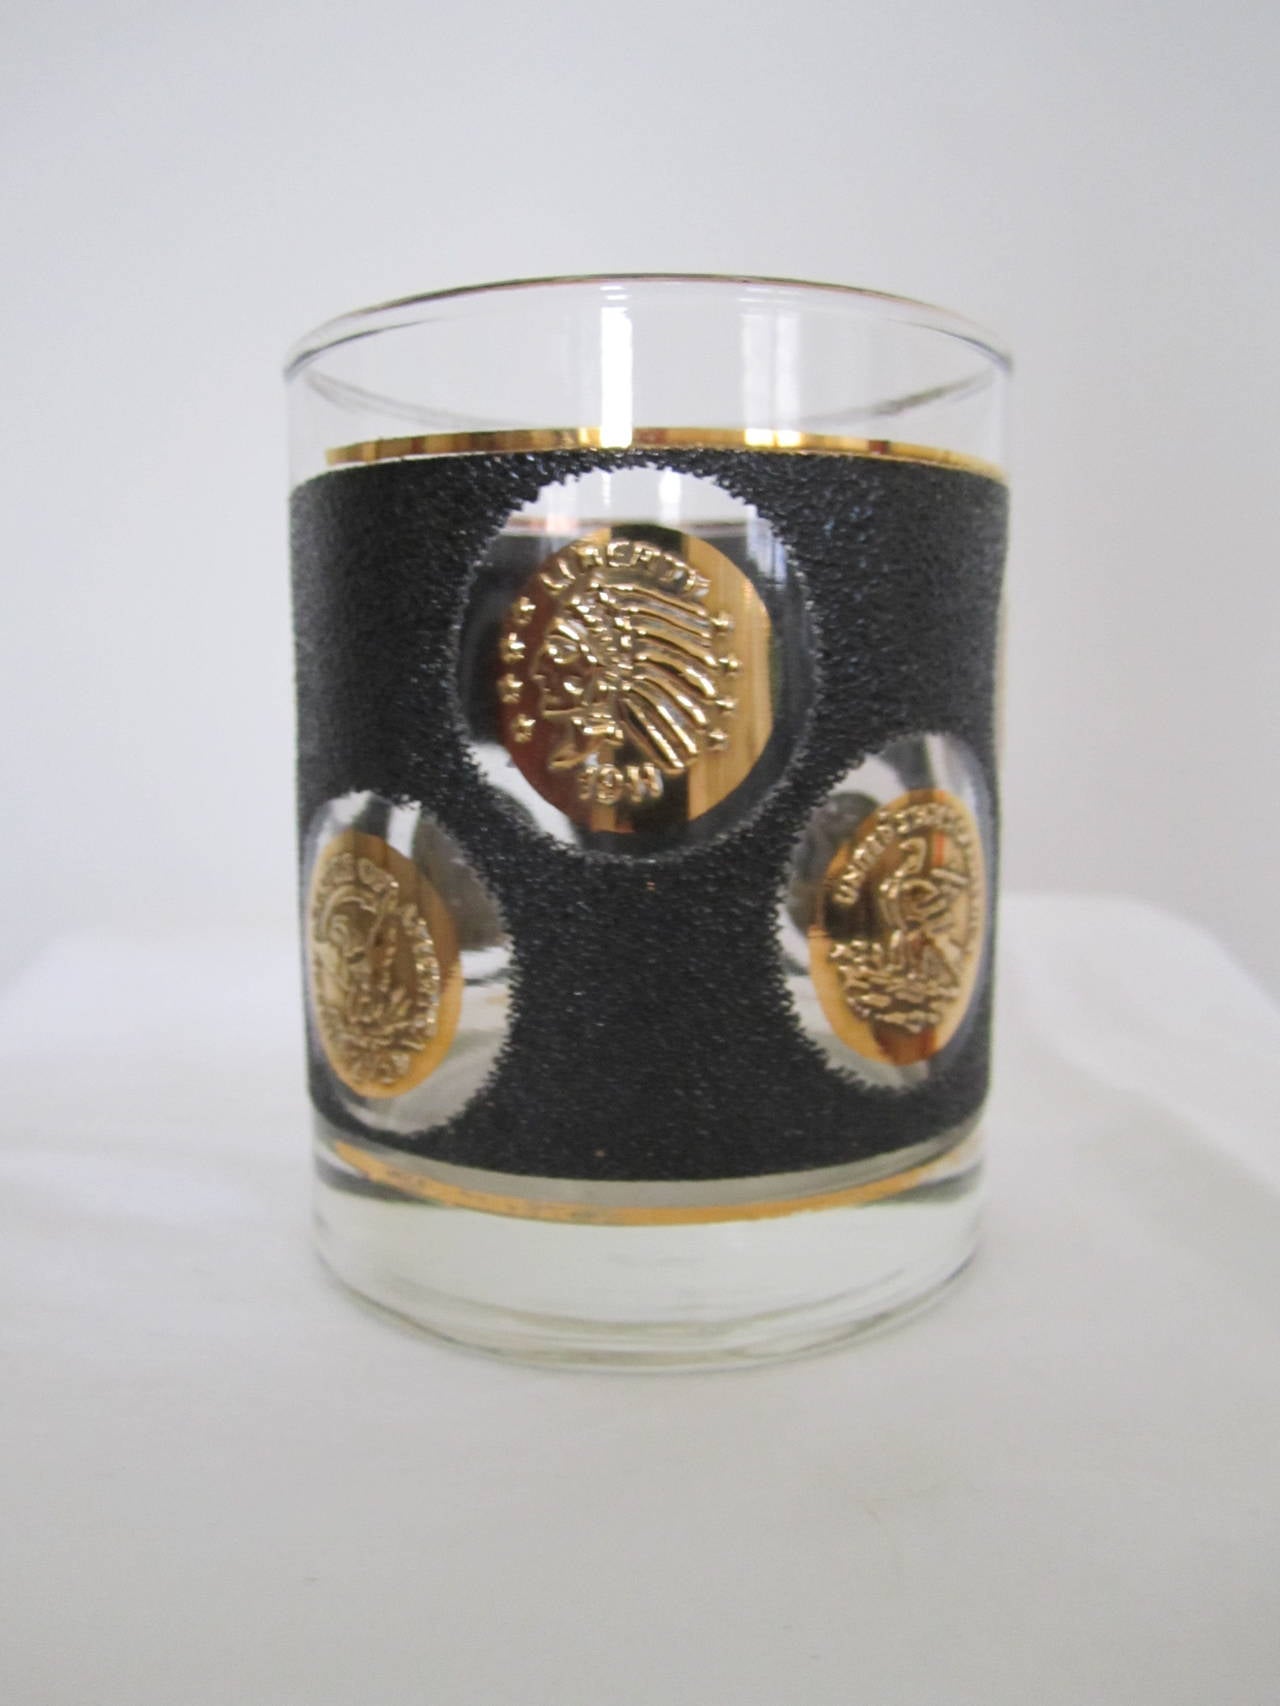 12 vintage Mid-Century Modern "Roly Poly" rocks glasses with black and gold coin motif. Set available here online. By request, set can be made available by appointment to the Trade in New York.

I
  